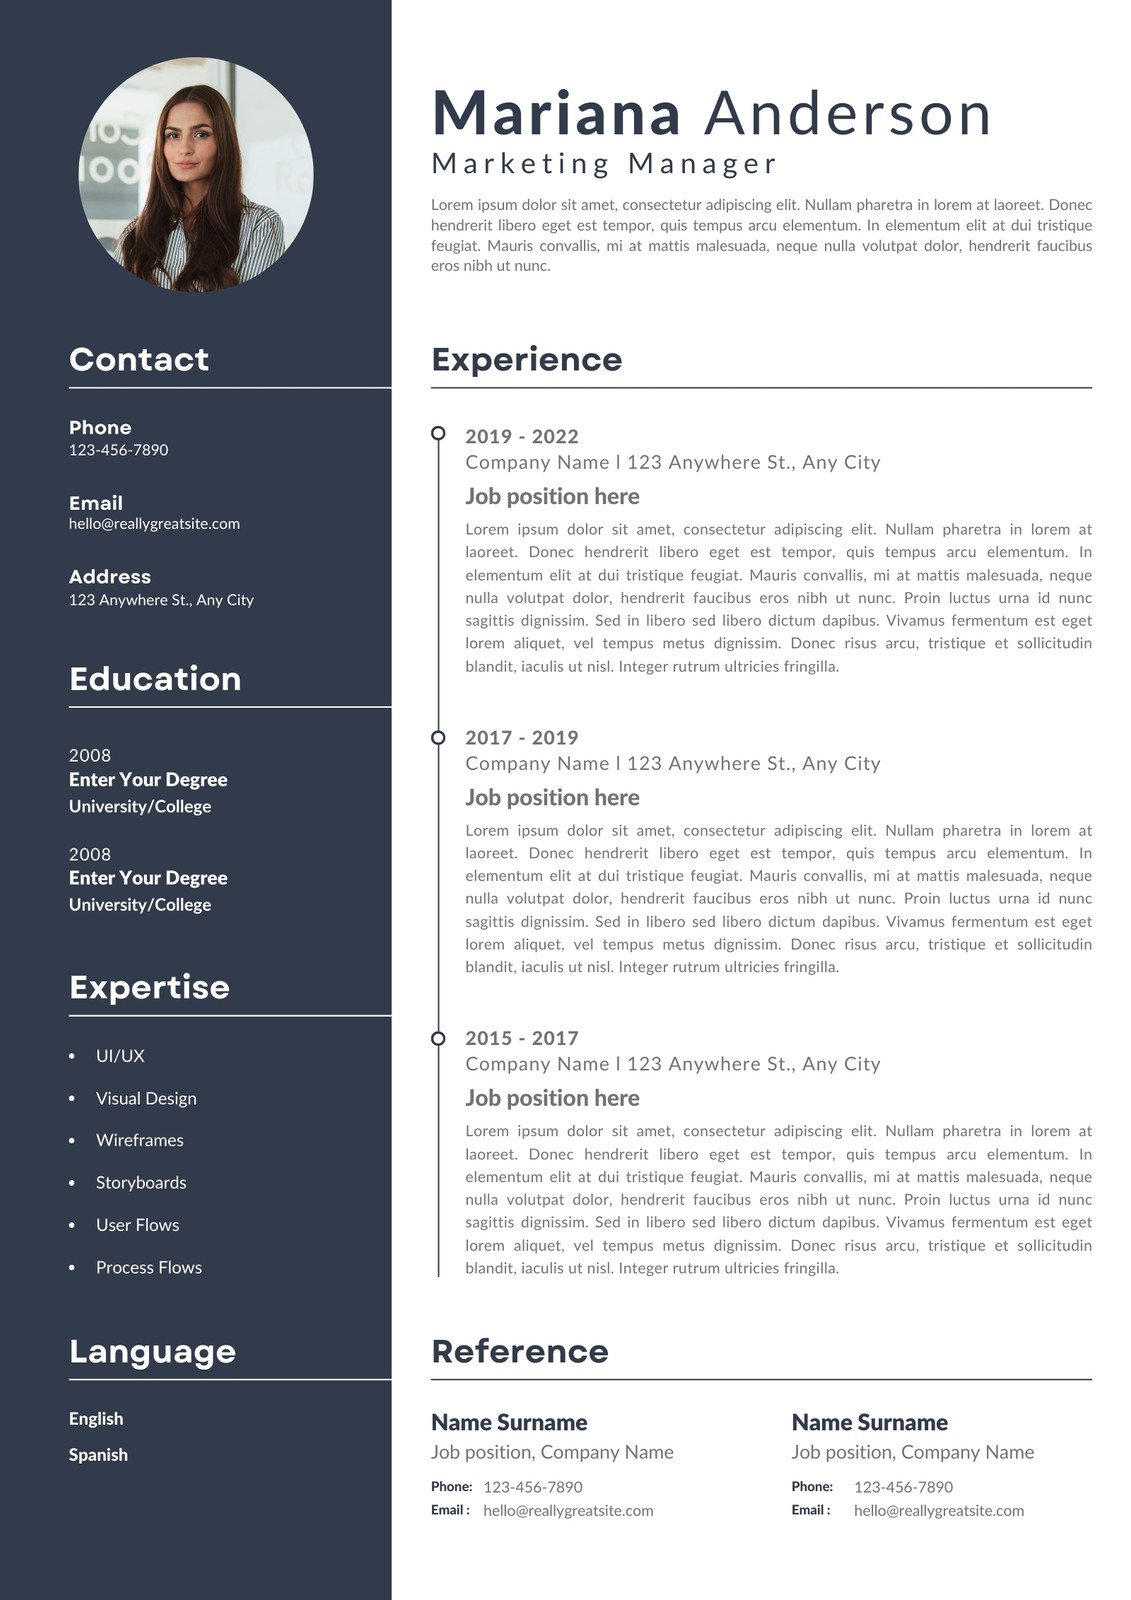 “Fantastic Compilation of Over 999 Resume Images in Full 4K Quality”